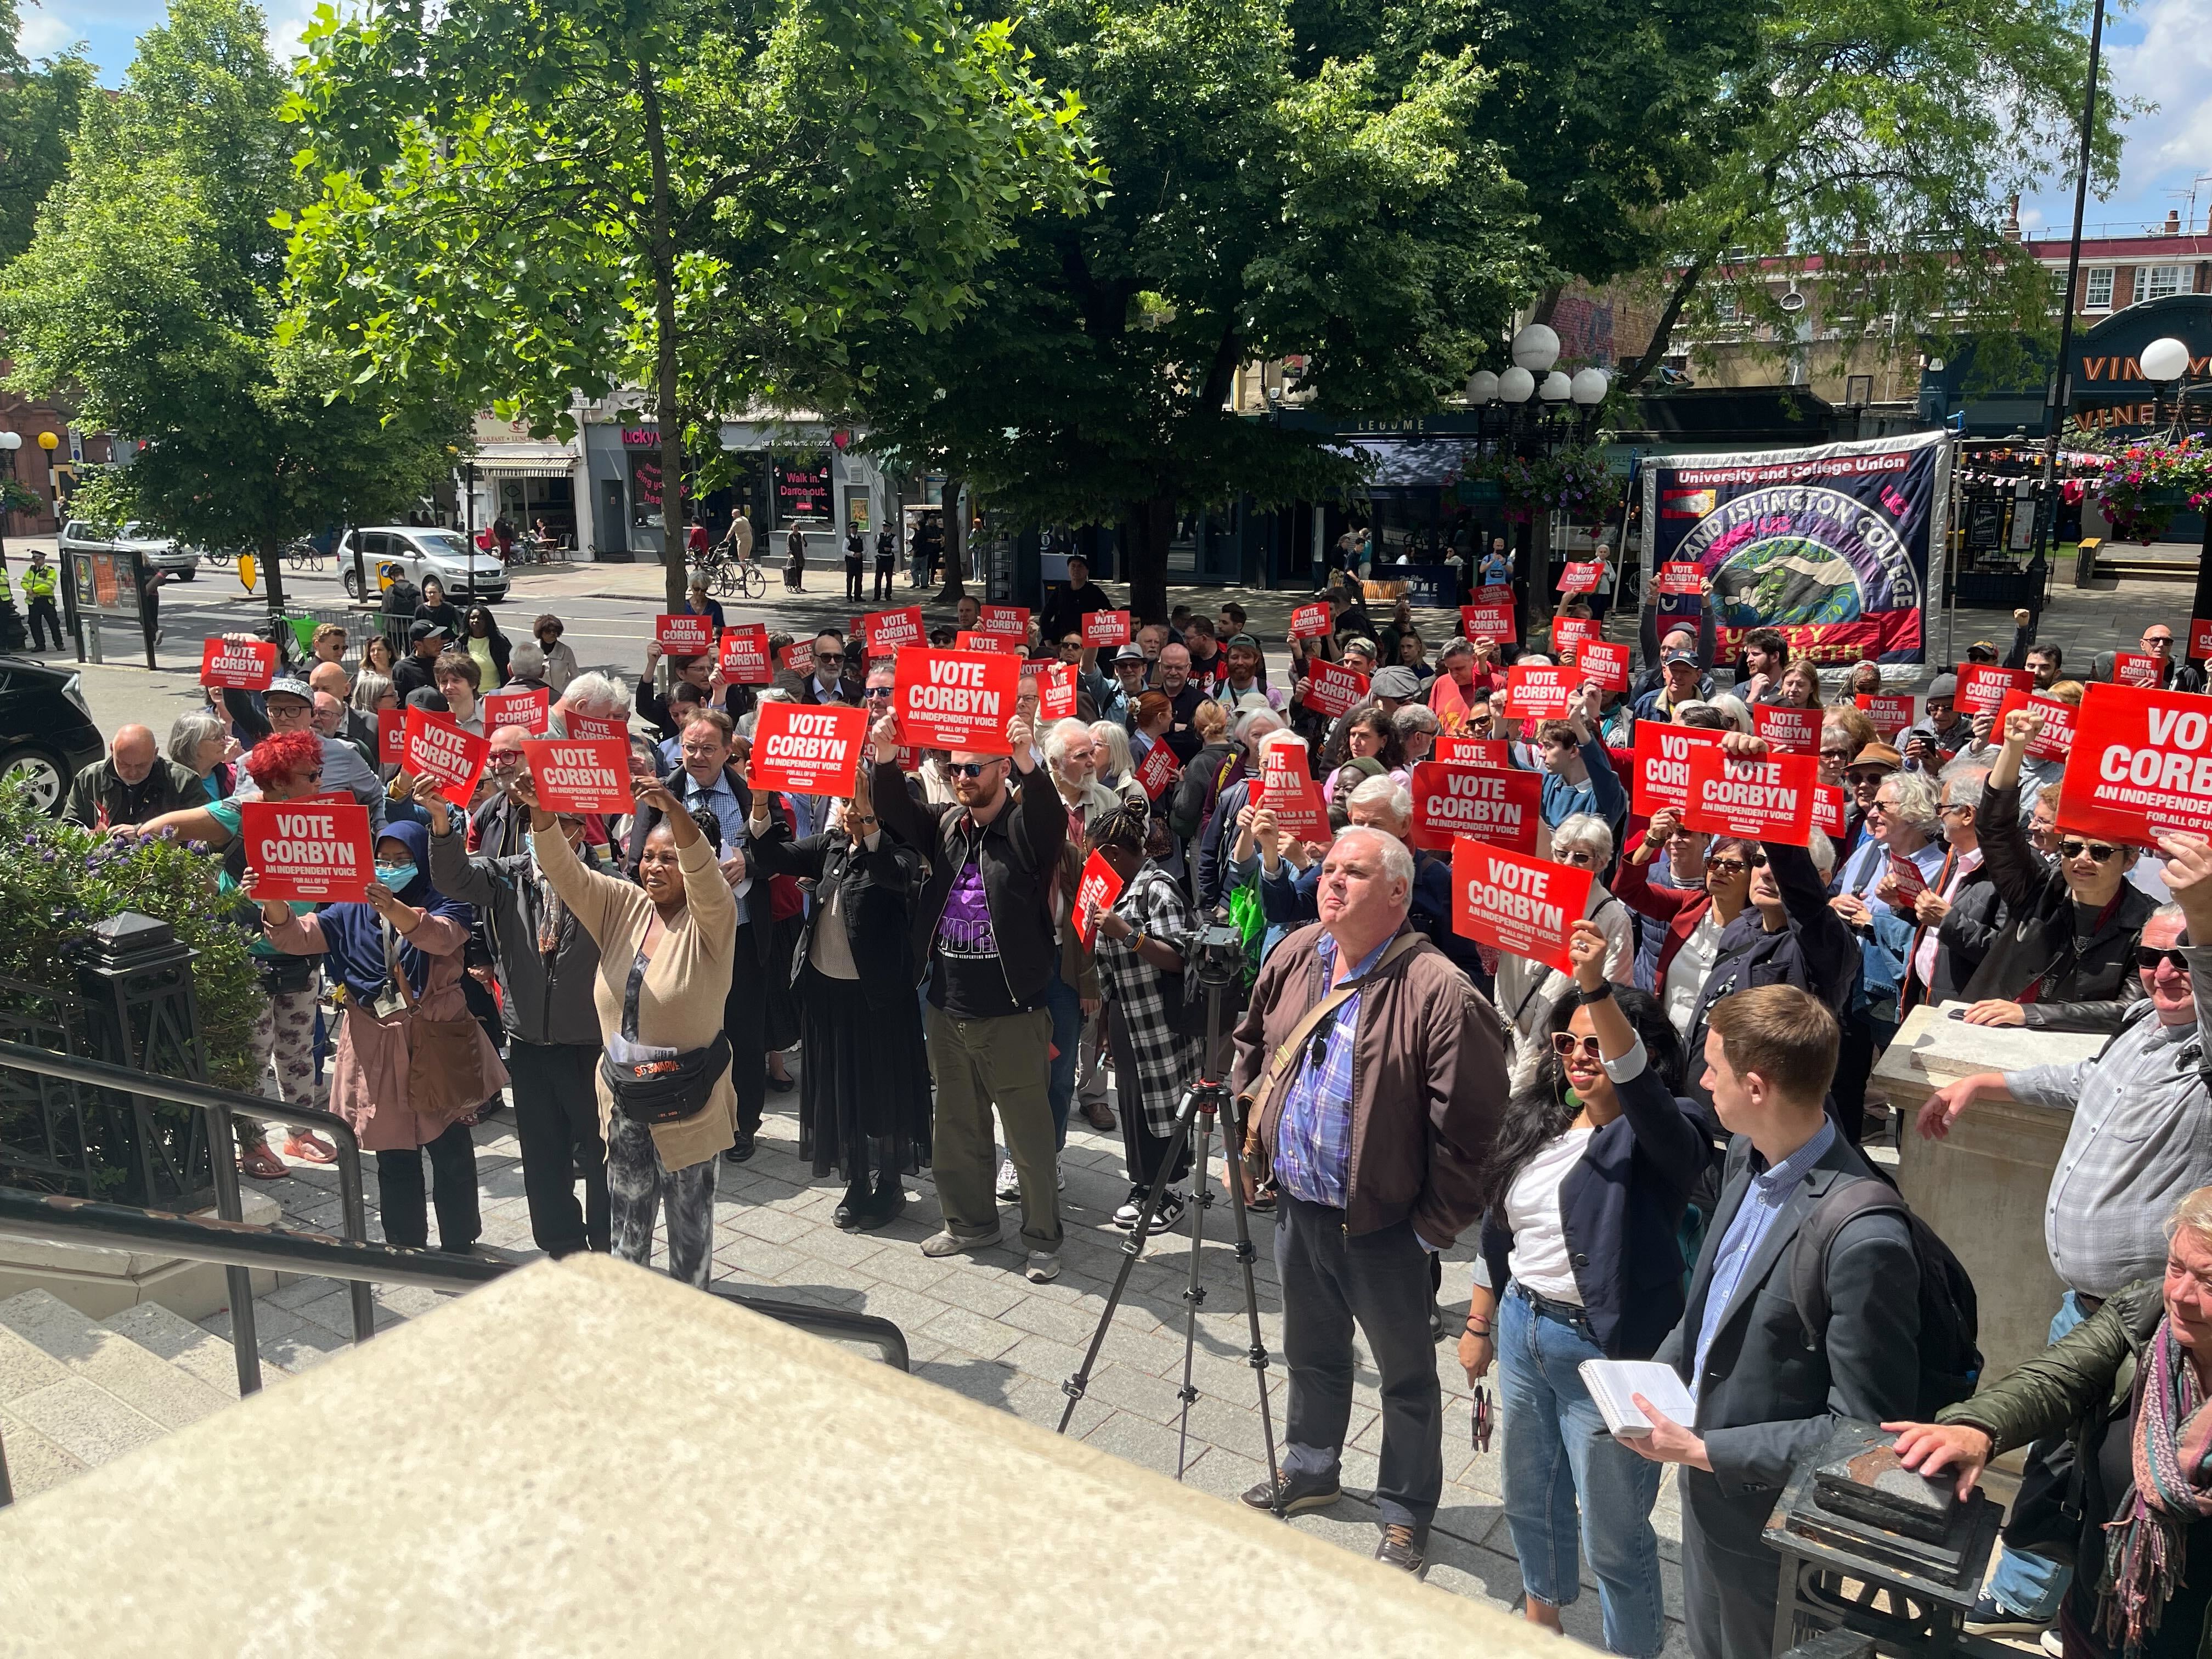 Supporters gathered in Islington for Mr Corbyn’s launch